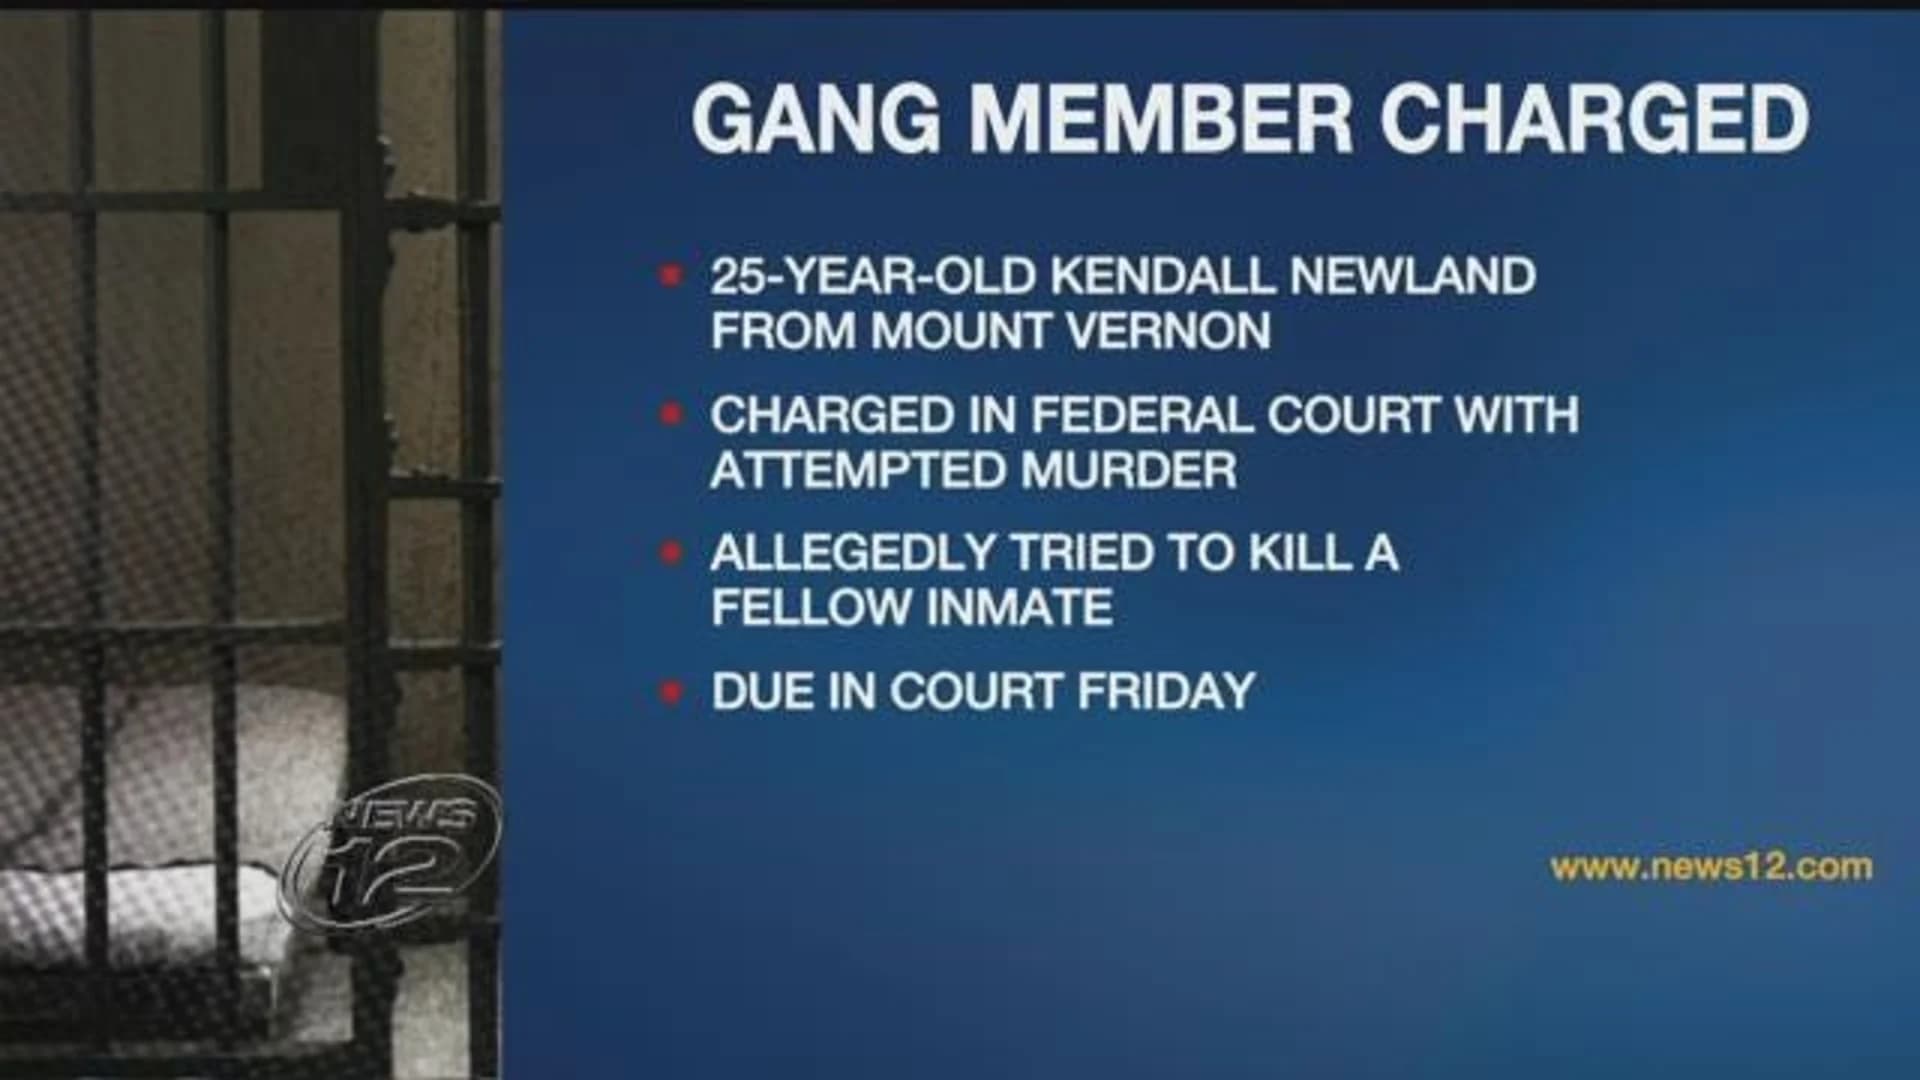 Alleged gang member charged with attempted murder